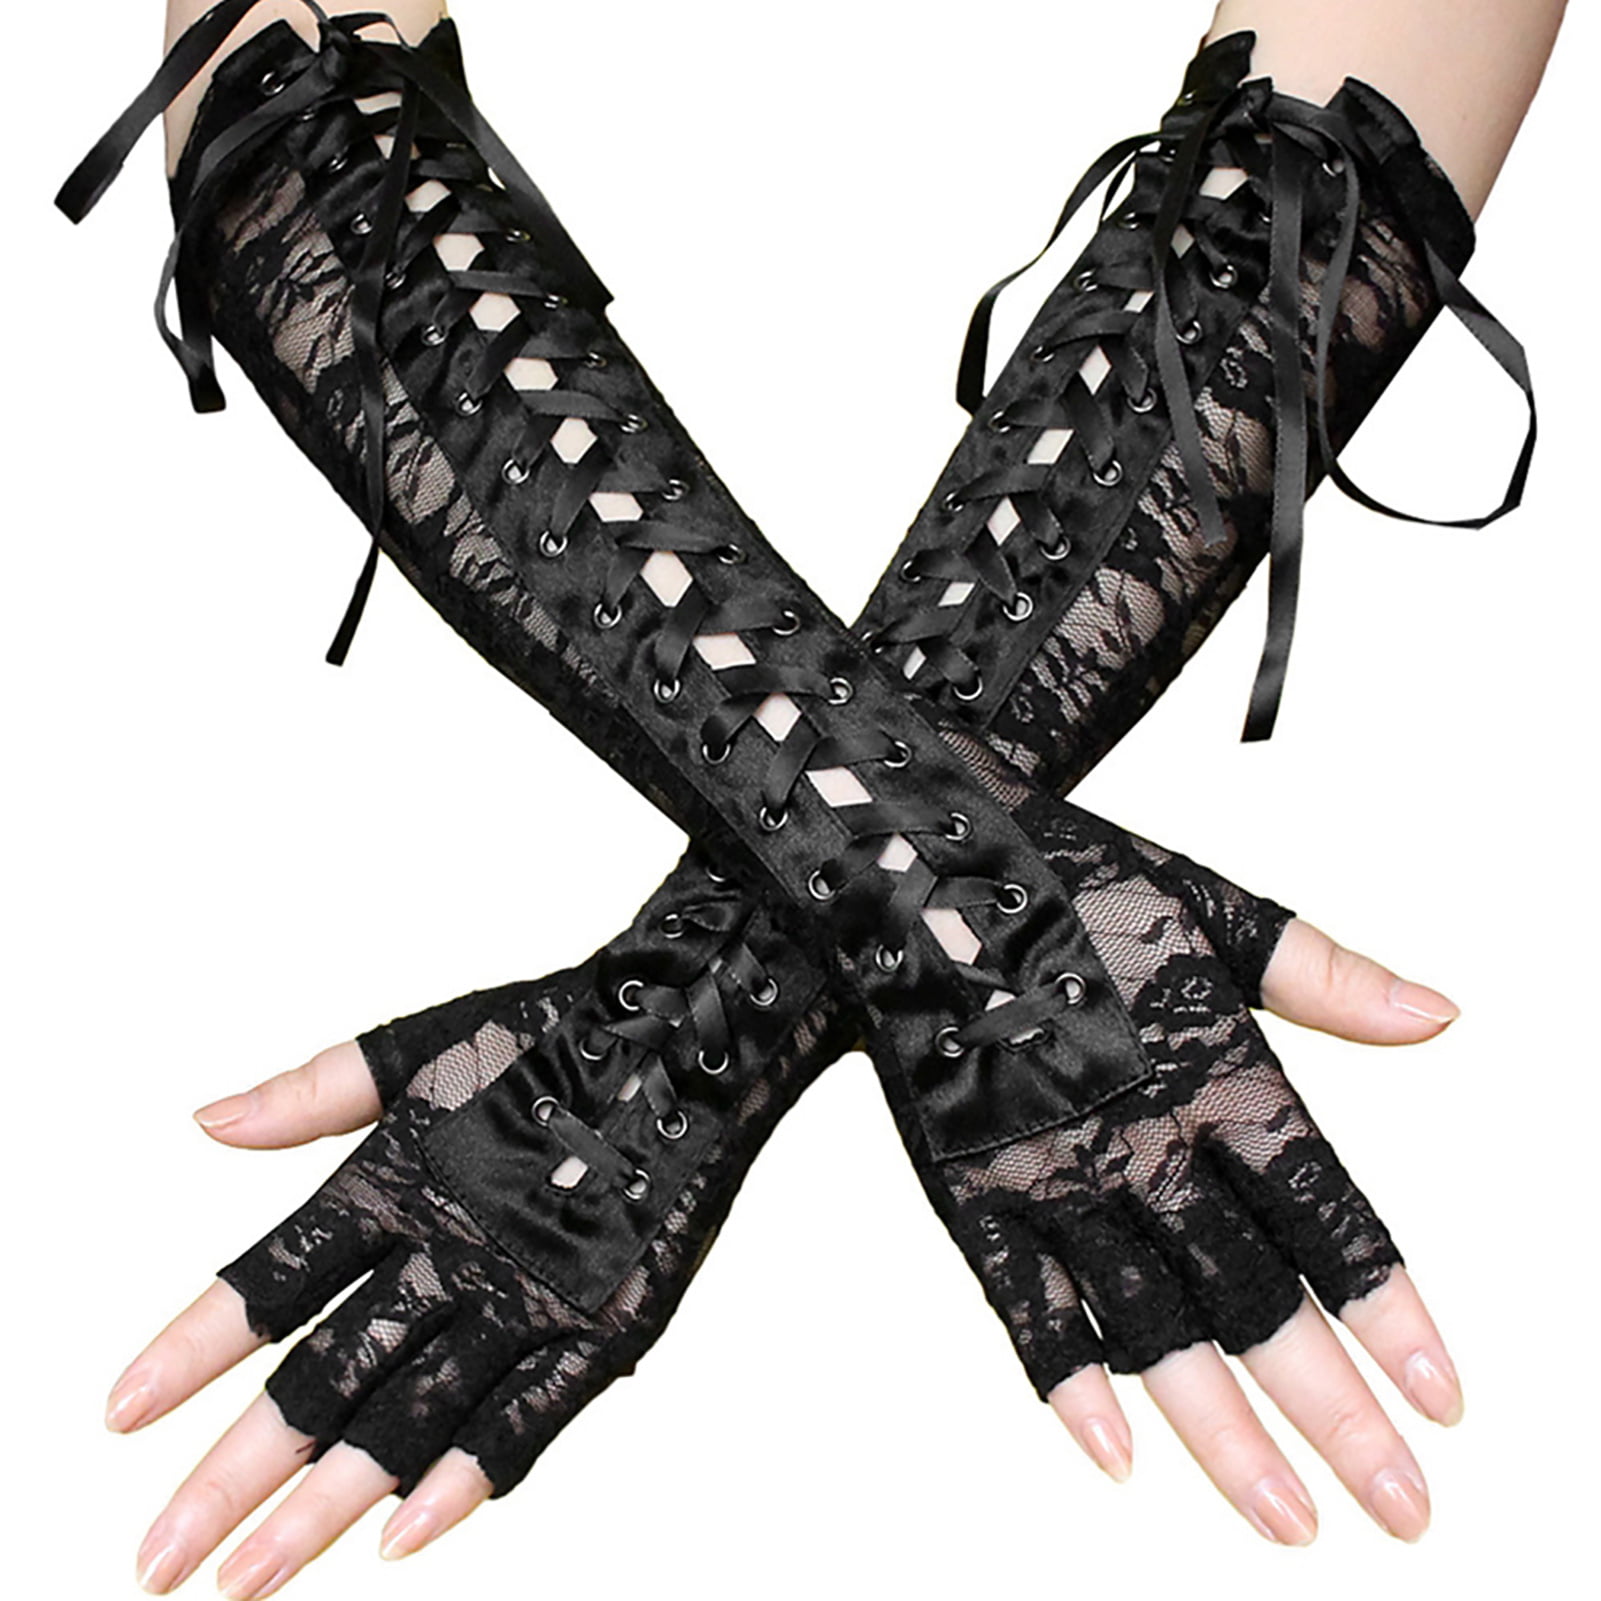 Womens Faux Leather Long Arm Gloves Fingerless Shiny Wet Look Novelty Evening Party Clubbing Accessories Outfits